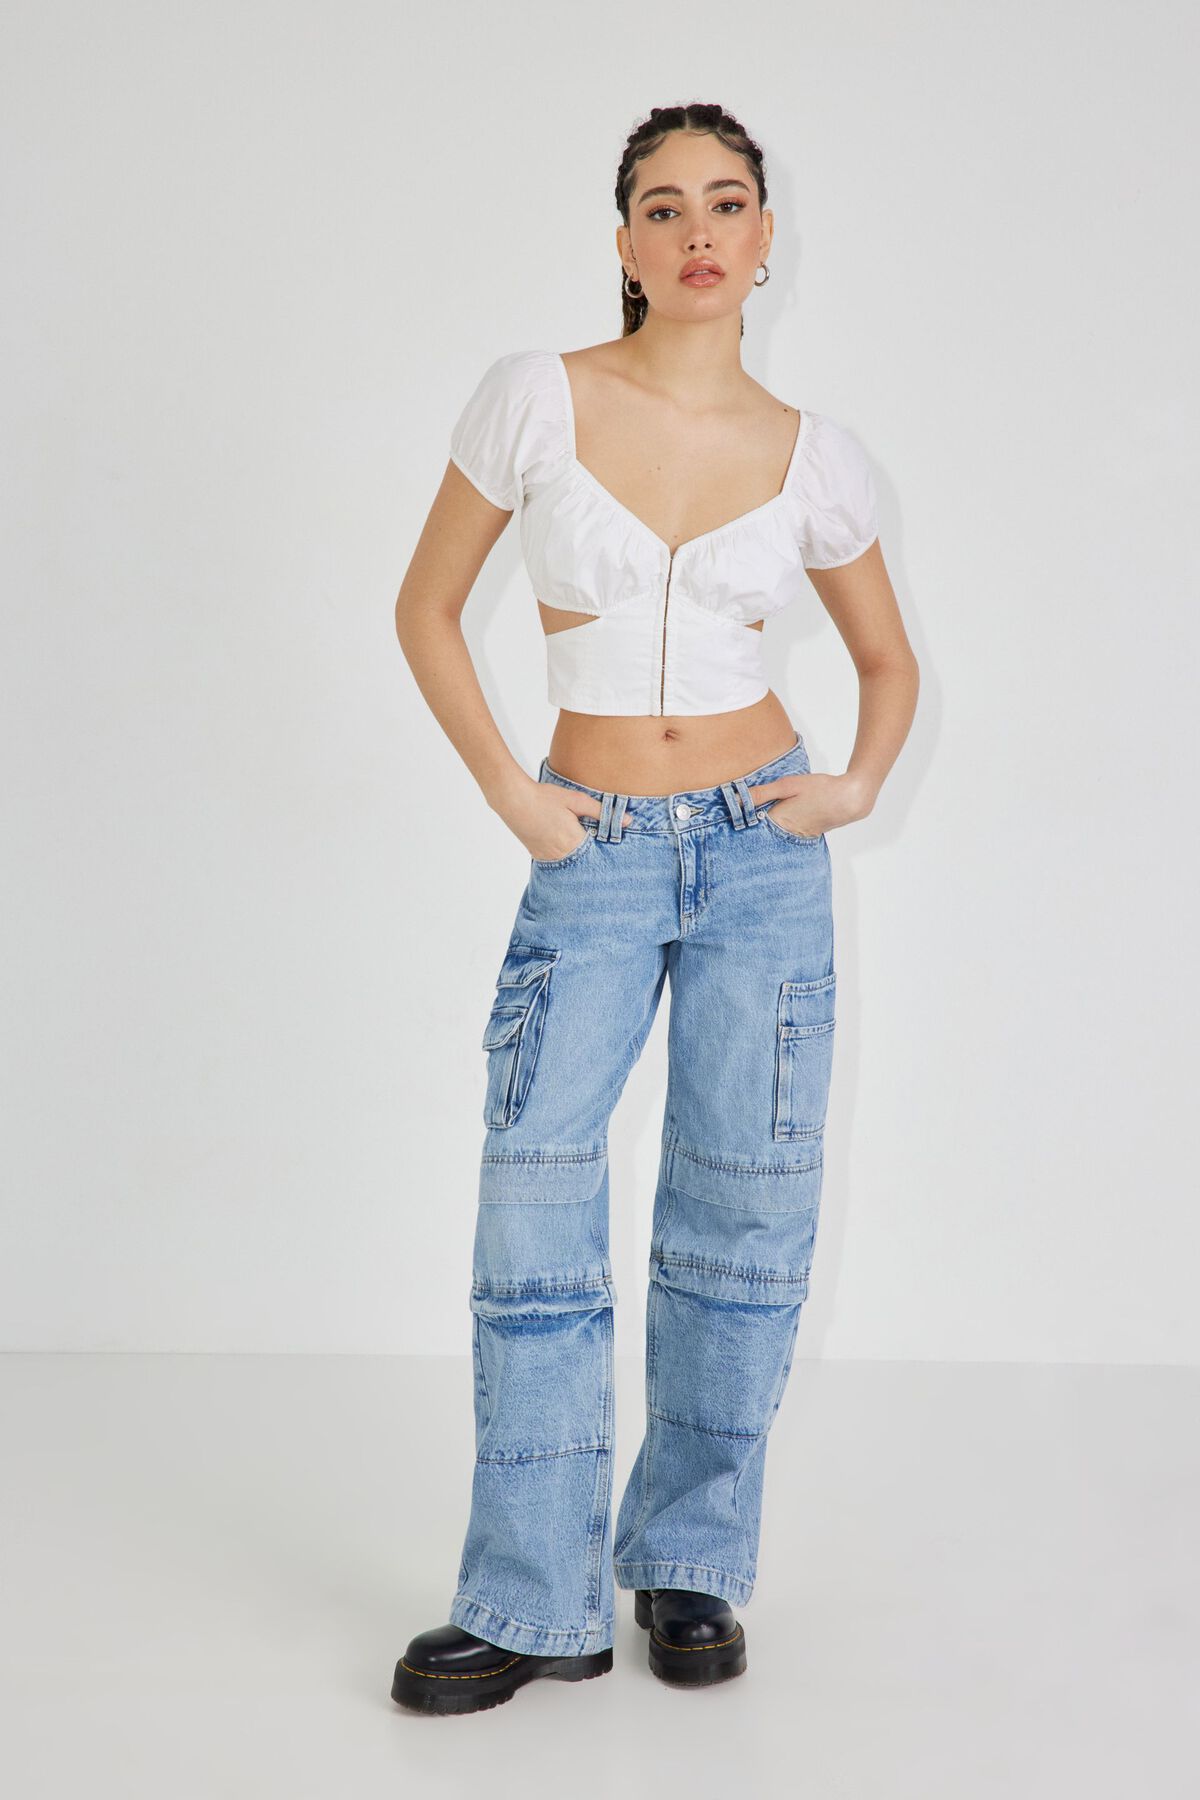 Cut Out Milkmaid Top | Garage